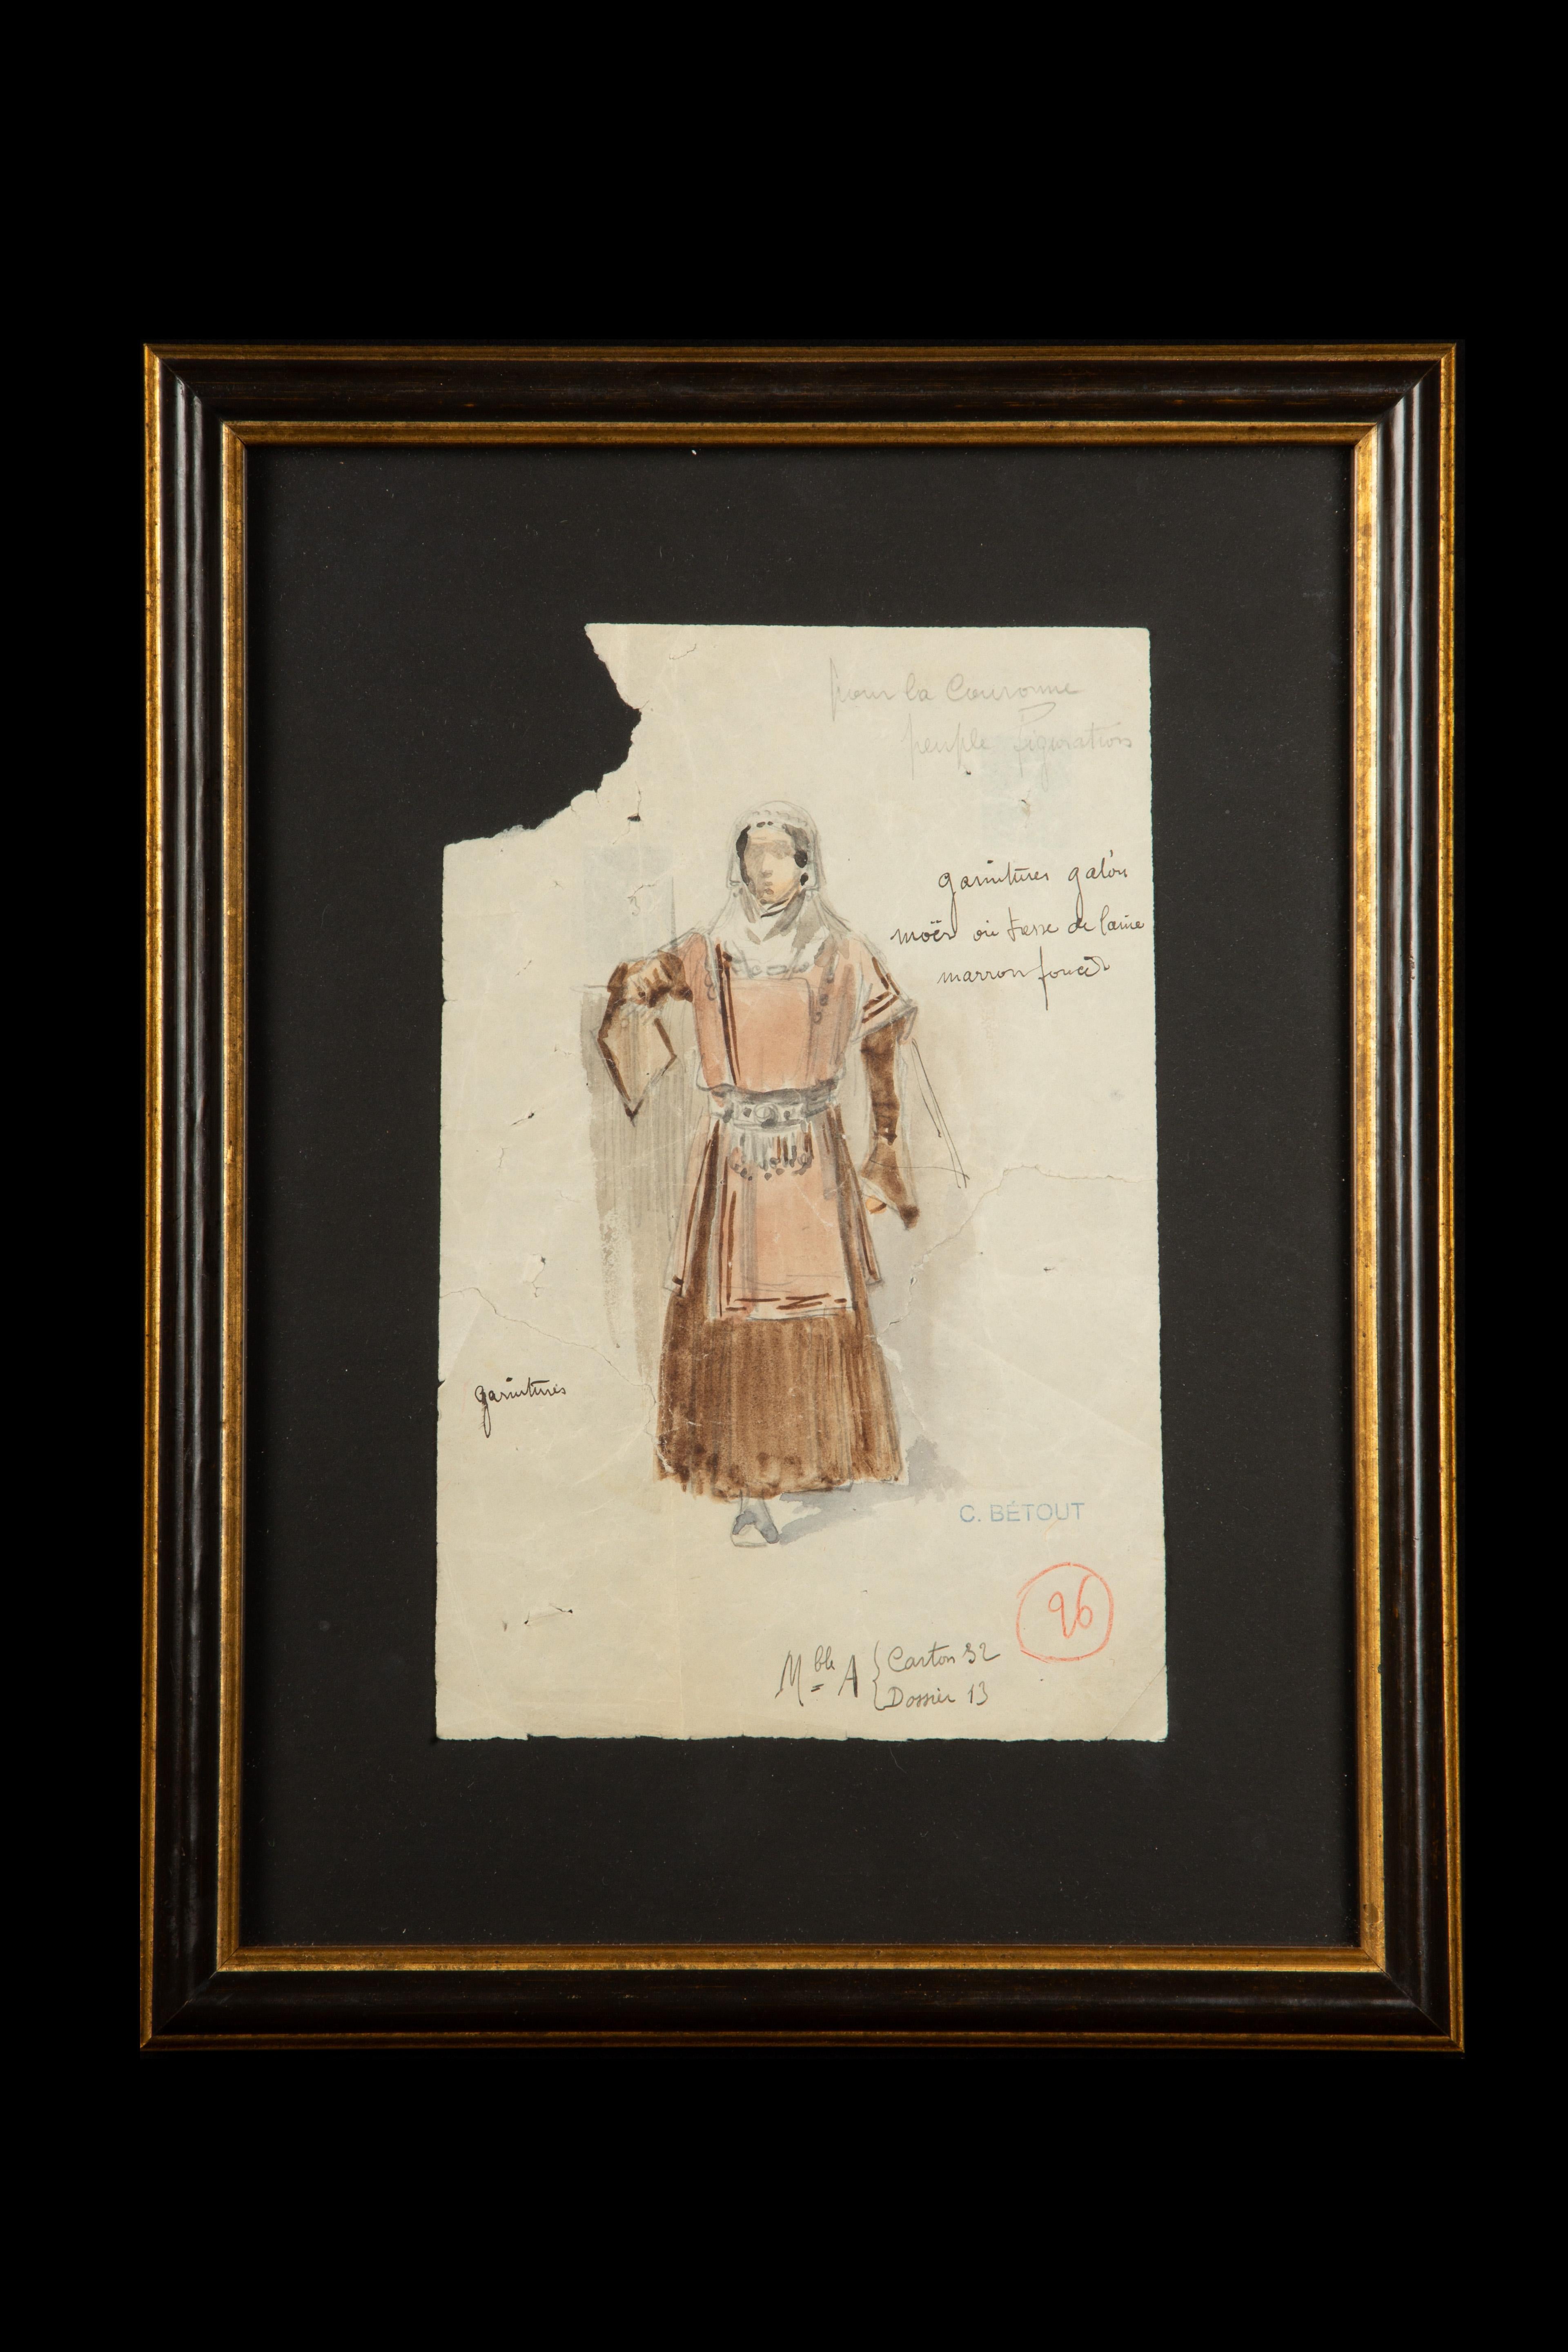 Original watercolor opera costume design by Charles Betout, the principal costume designer for the Comédie-Française in Paris from 1919 til his death in 1939. Betout was renowned for his diligent historical research, and his costumes were in high